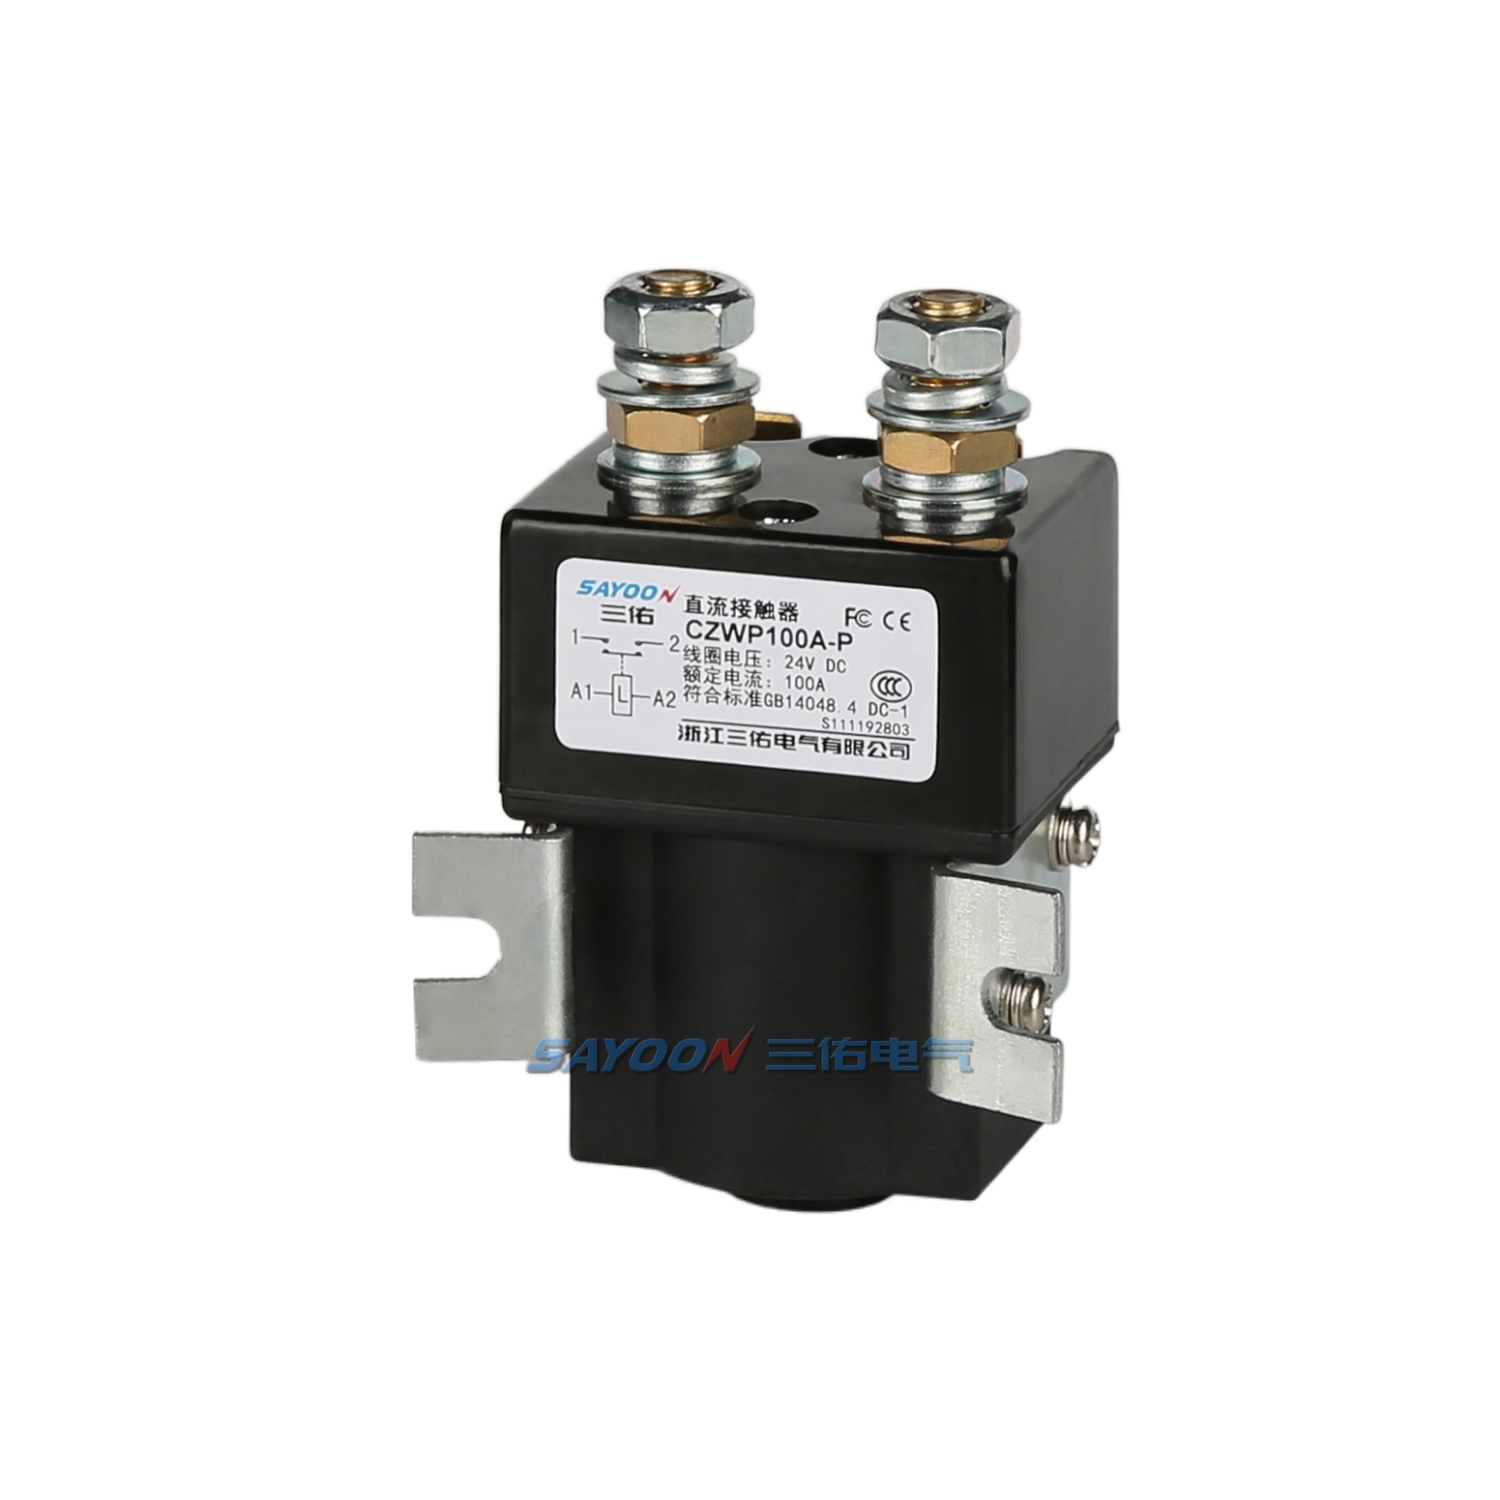 SAYOON 100A Supplier Selling Products Electric control power <a href='/contactor/'>Contactor</a> Magnetic 12v 24v 36v 48v <a href='/dc-contactor/'>dc contactor</a> SW80P/ CZWP100A